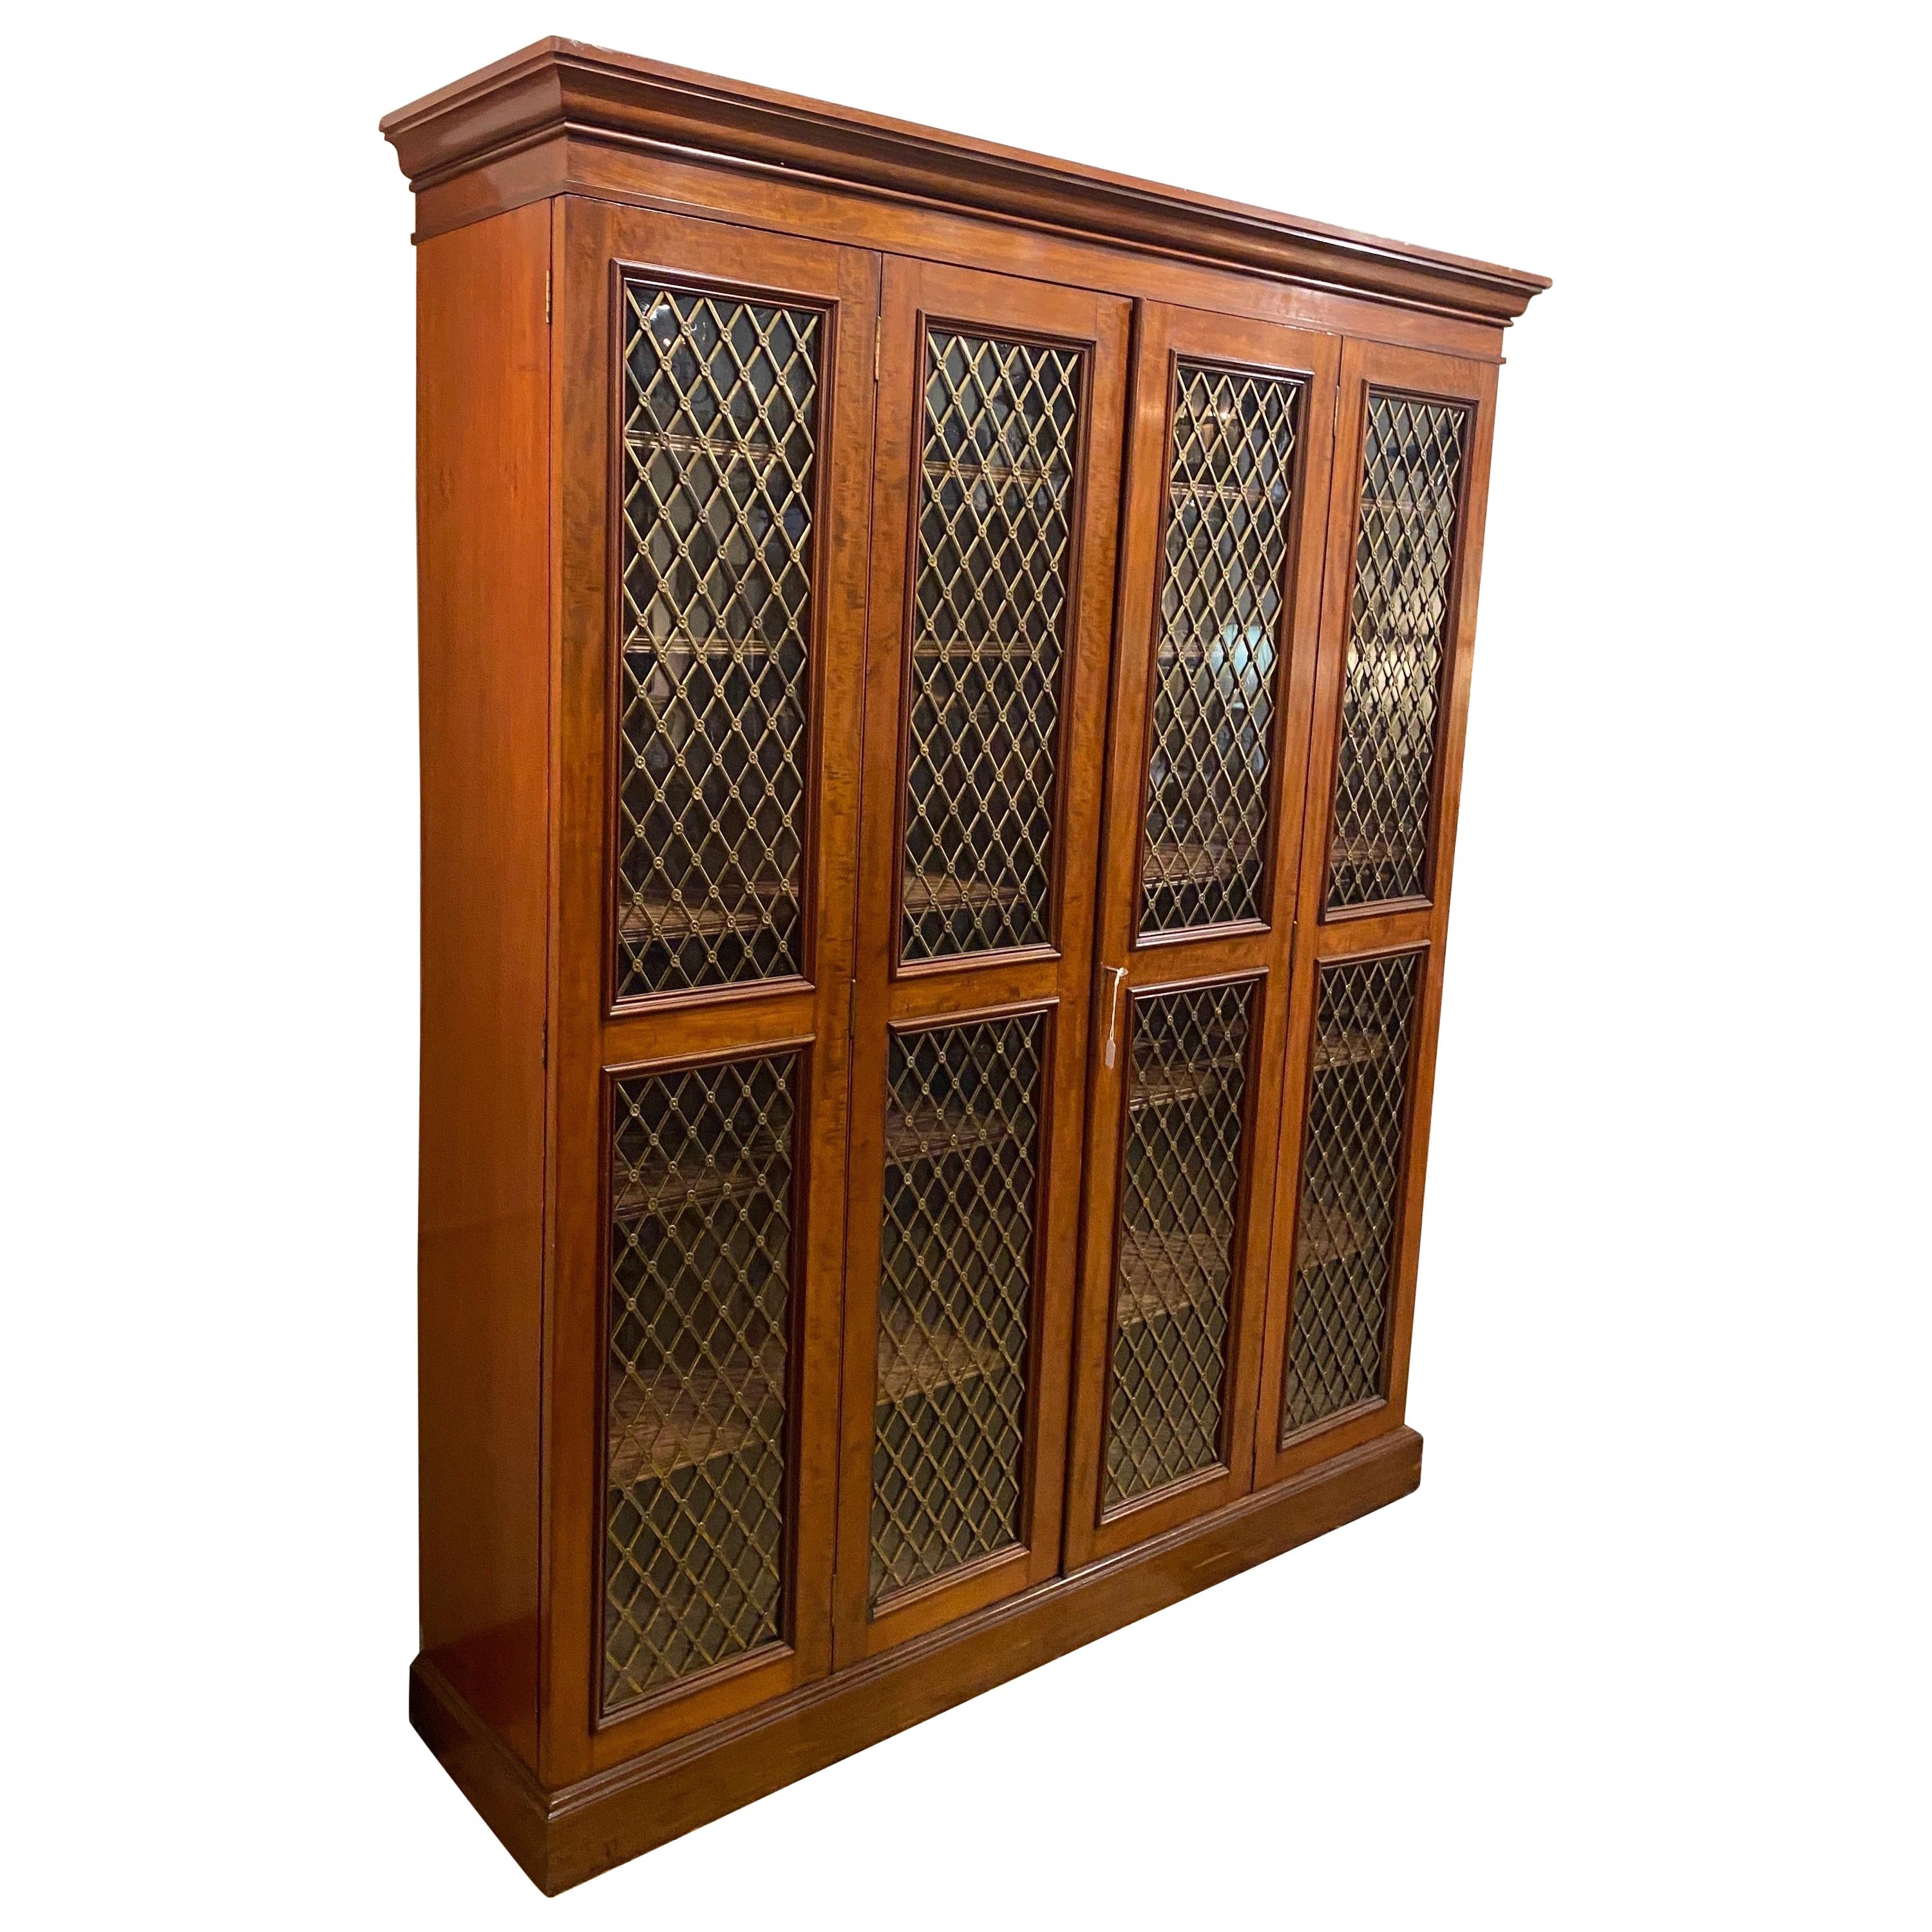 19th Century English Regency Bookcase or Gun Case with Double Folding Doors